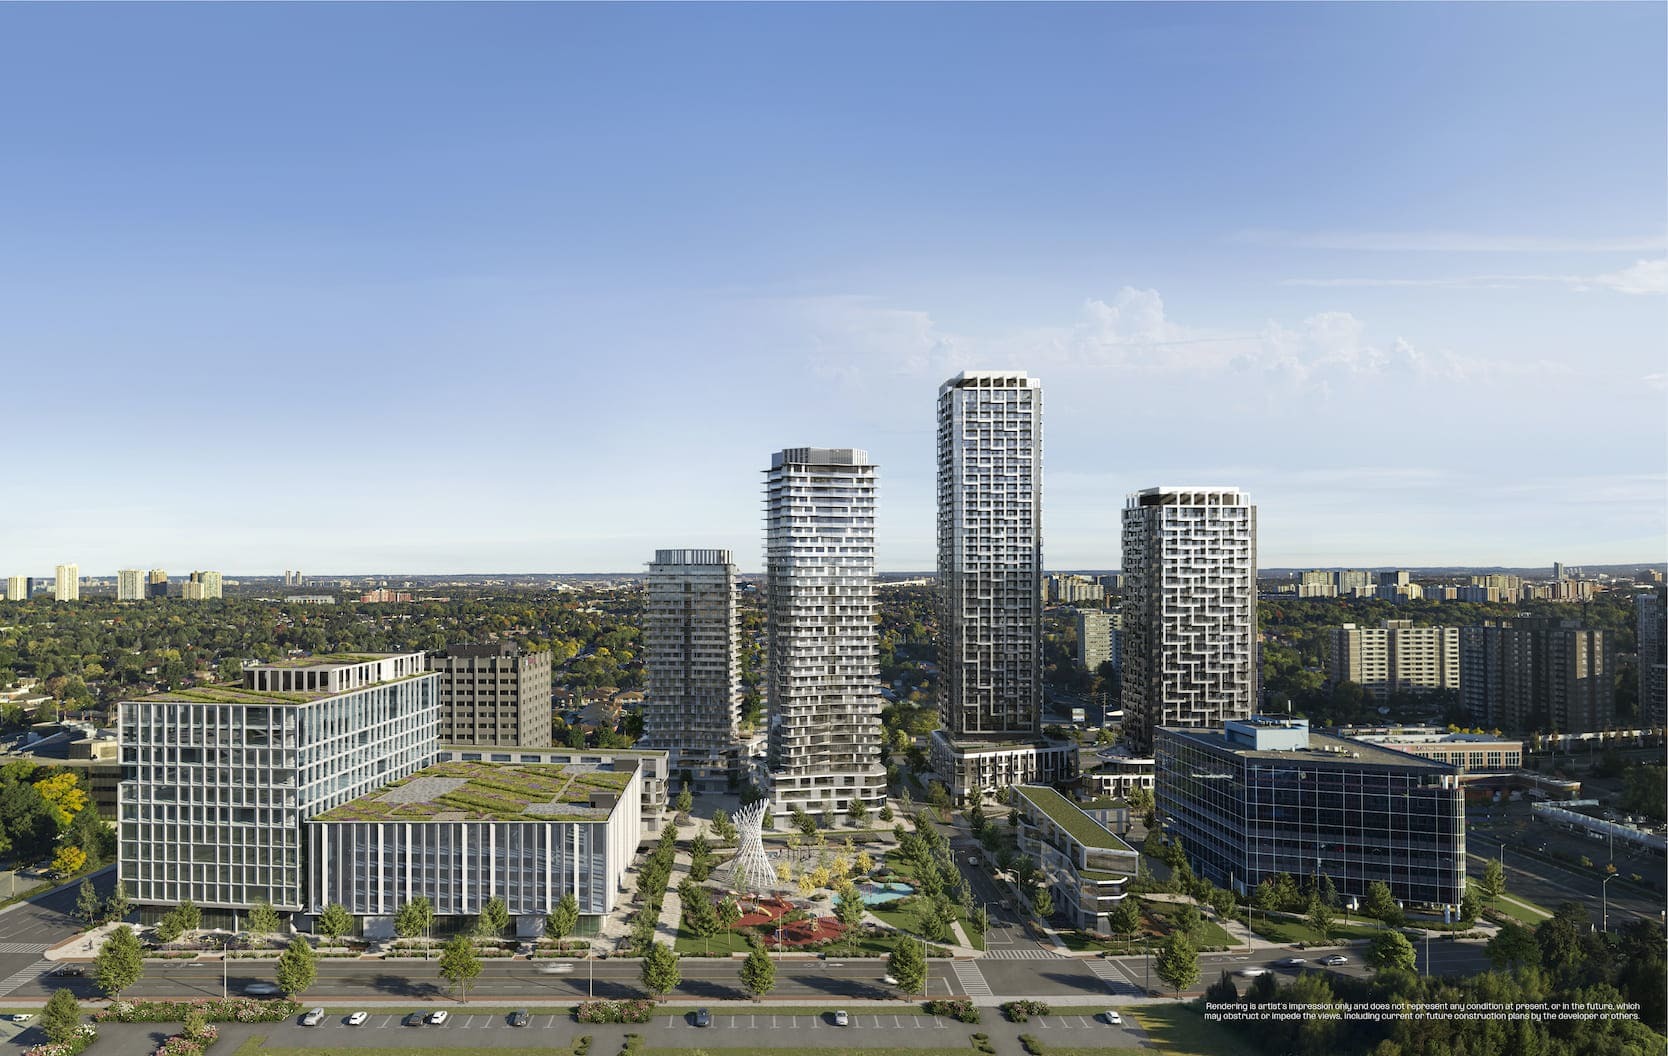 Artist rendering of the LSQ condos on Sheppard Avenue East in North York, Toronto